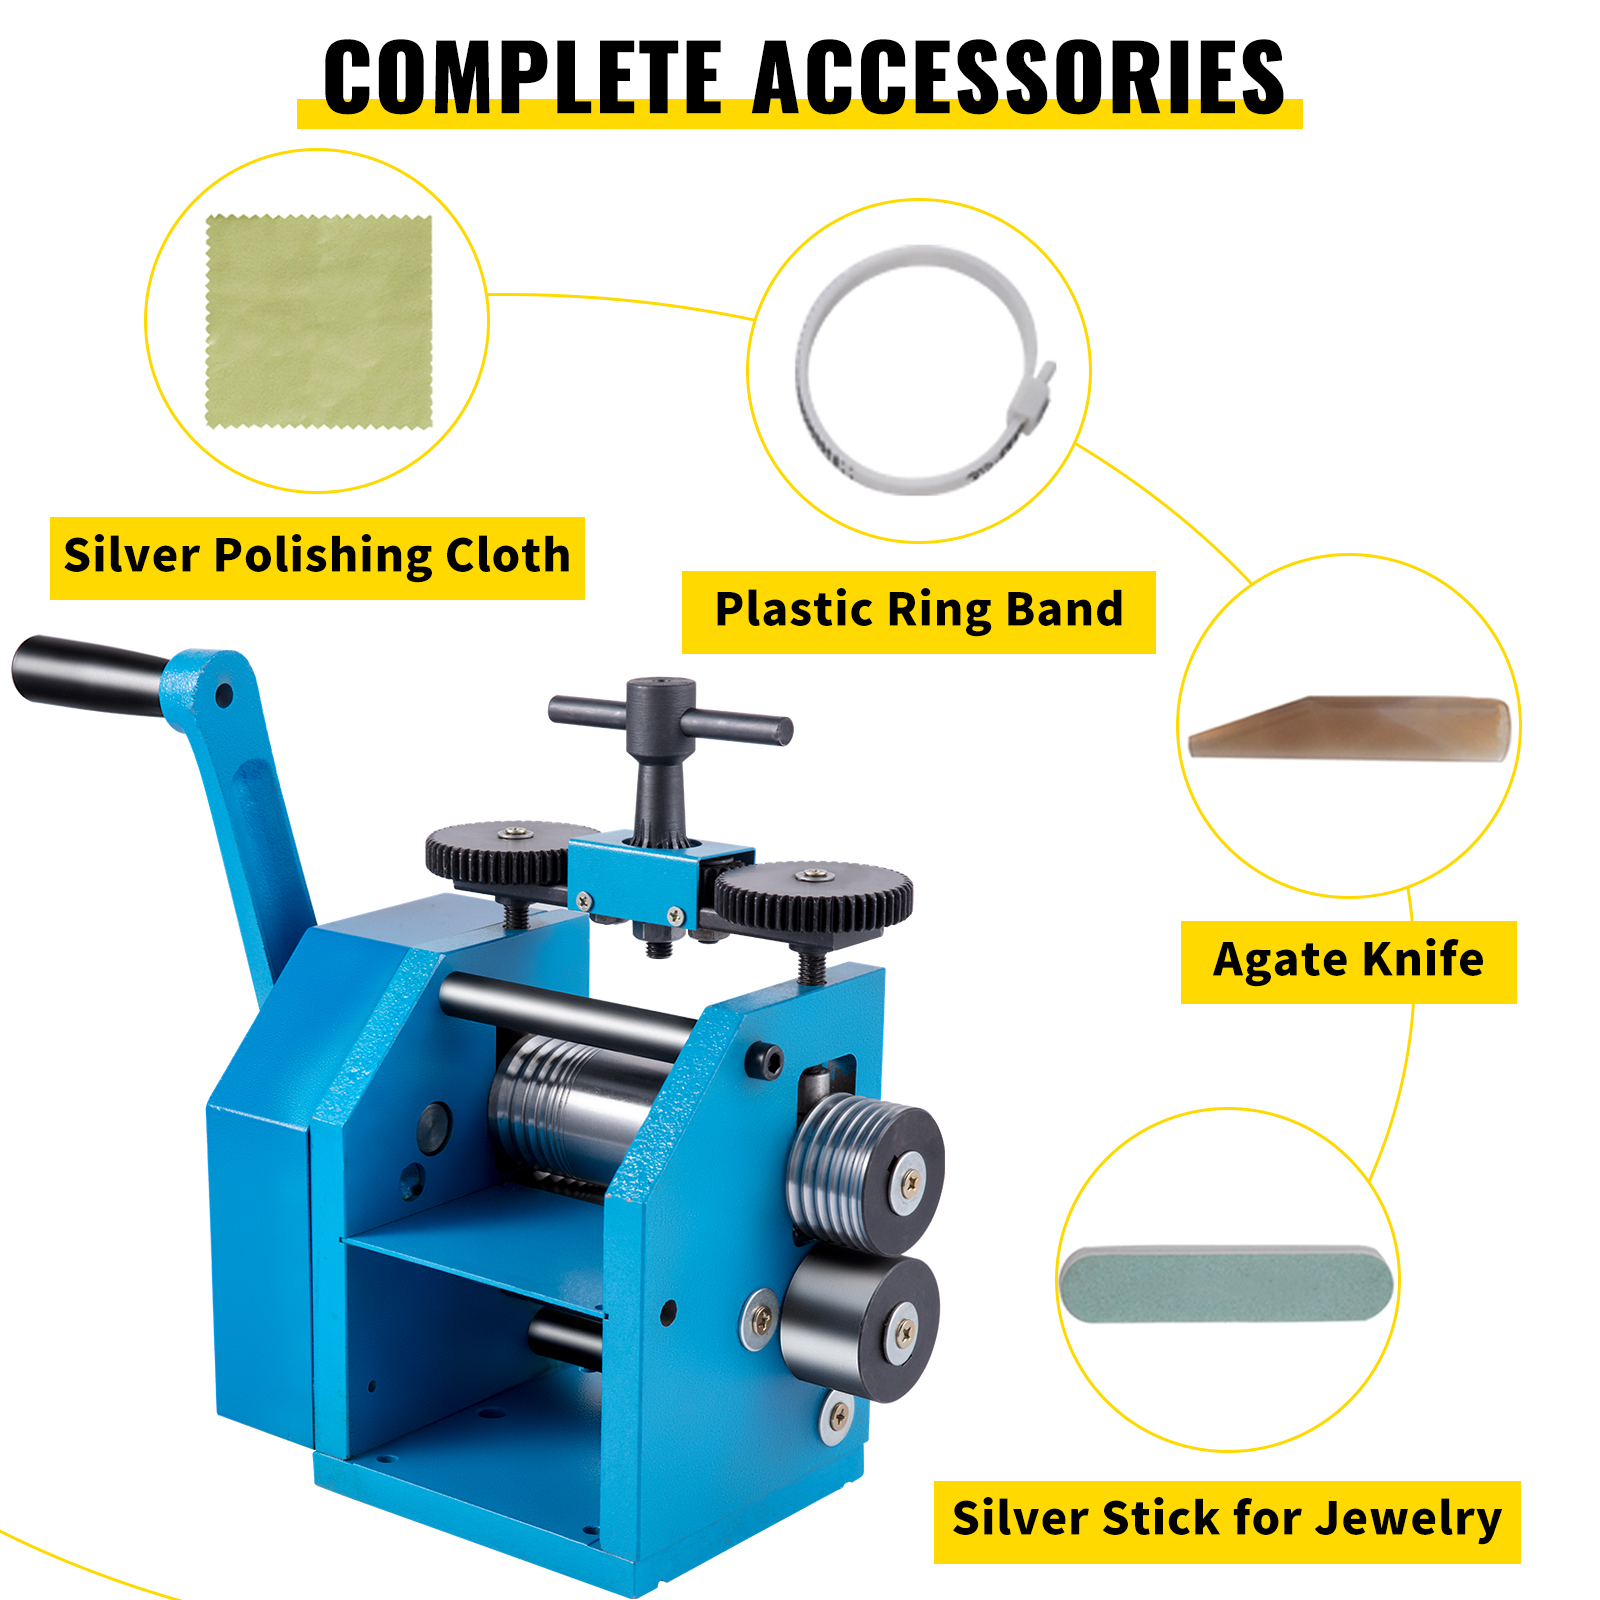 CHENGYAN【Upgrade version】Manual Rolling Mill Machine - 3（75mm）Roller  Manual Combination Rolling Mill Machine Jewelry Press Tabletting Tool  Jewelry